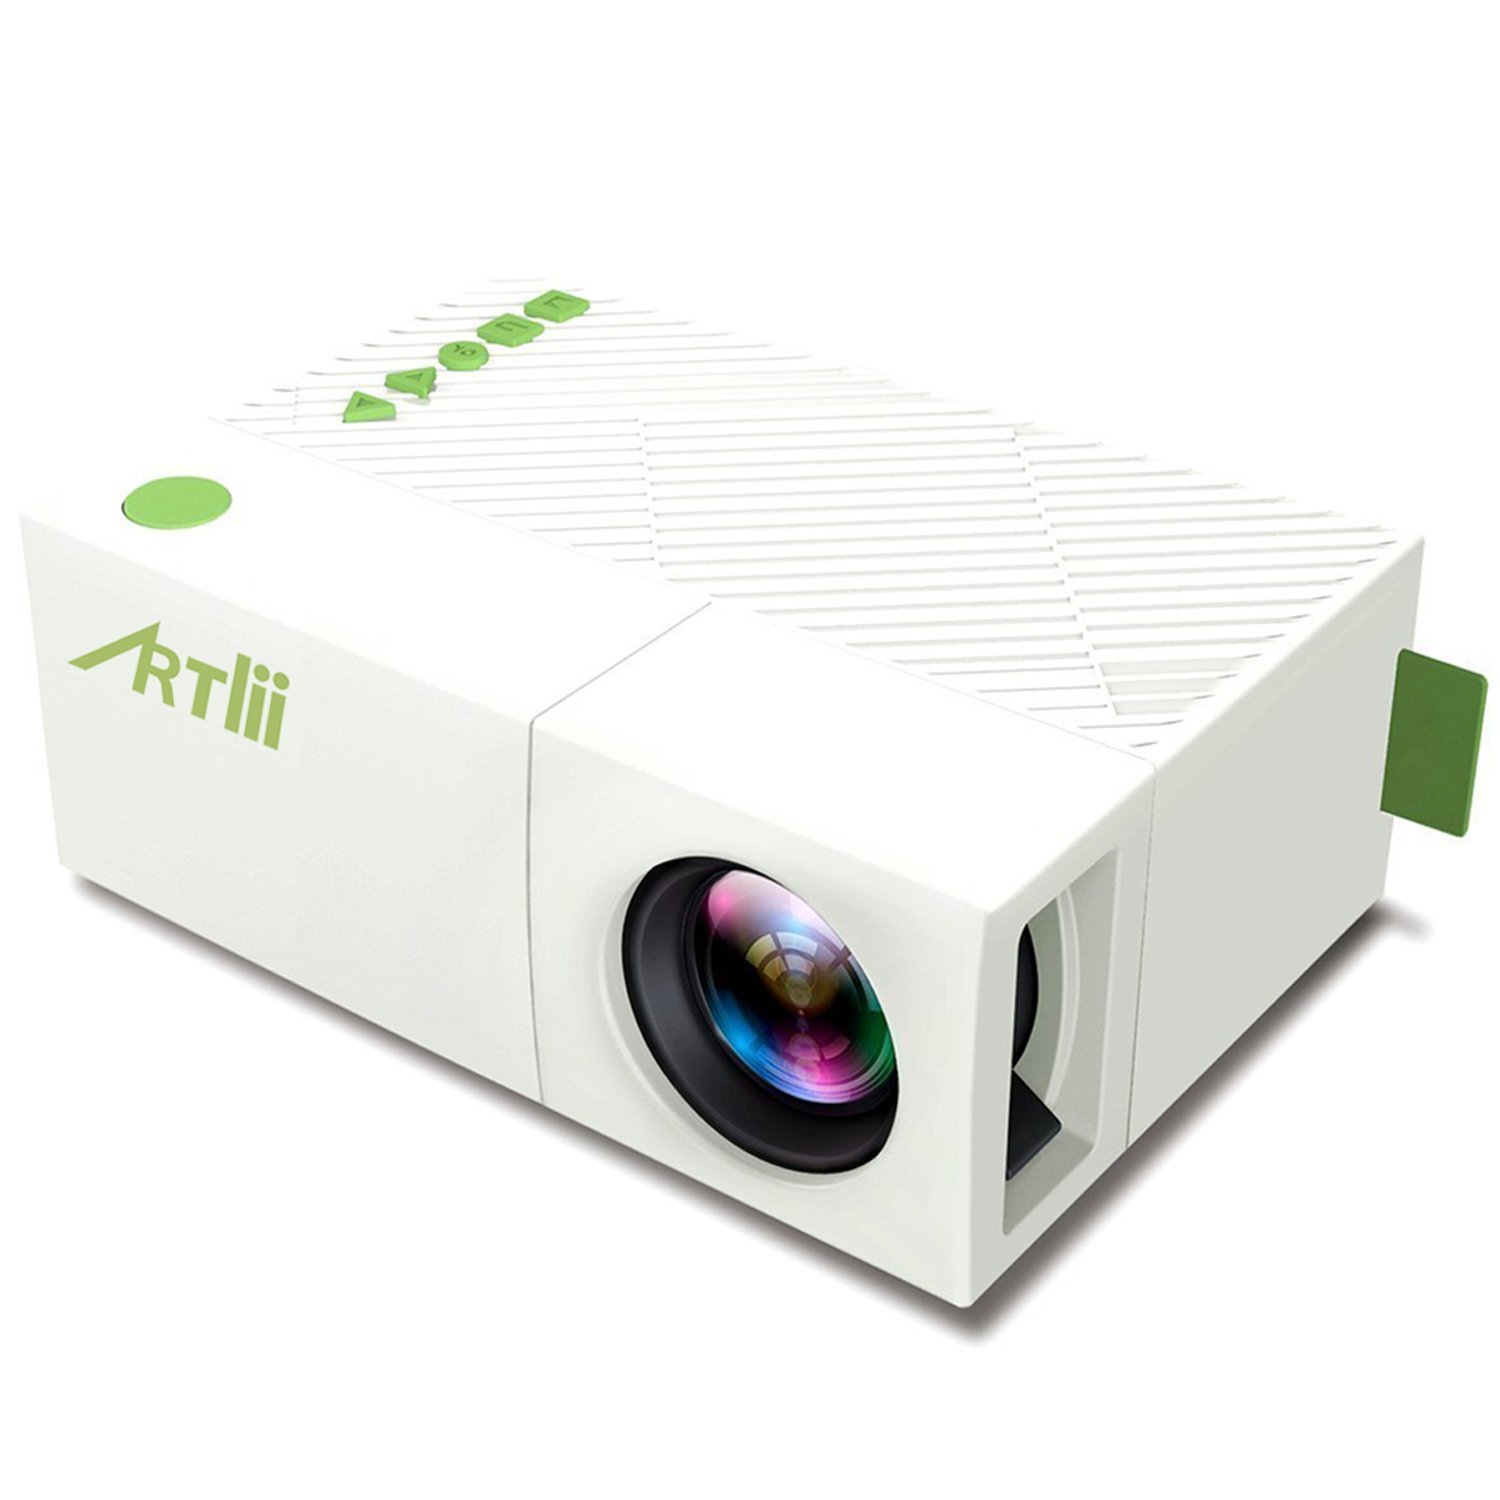 Mobile Projector, Artlii Mini Portable Projector for iPhone Android